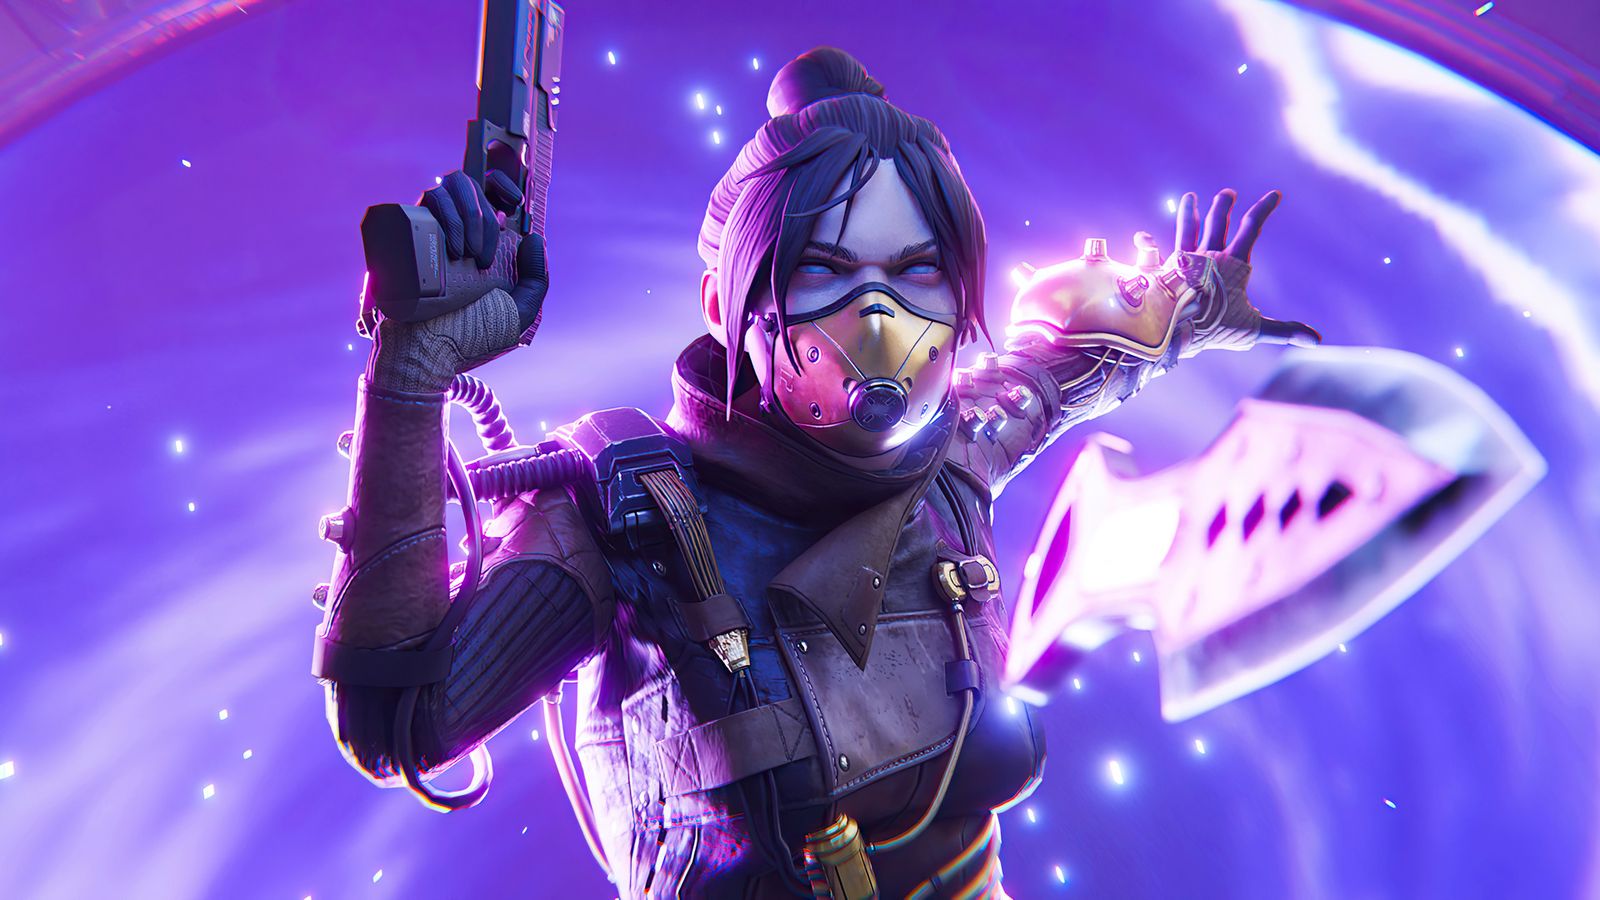 Screenshot of Apex Legends Wraith wearing a mask and holding a pistol on a purple background